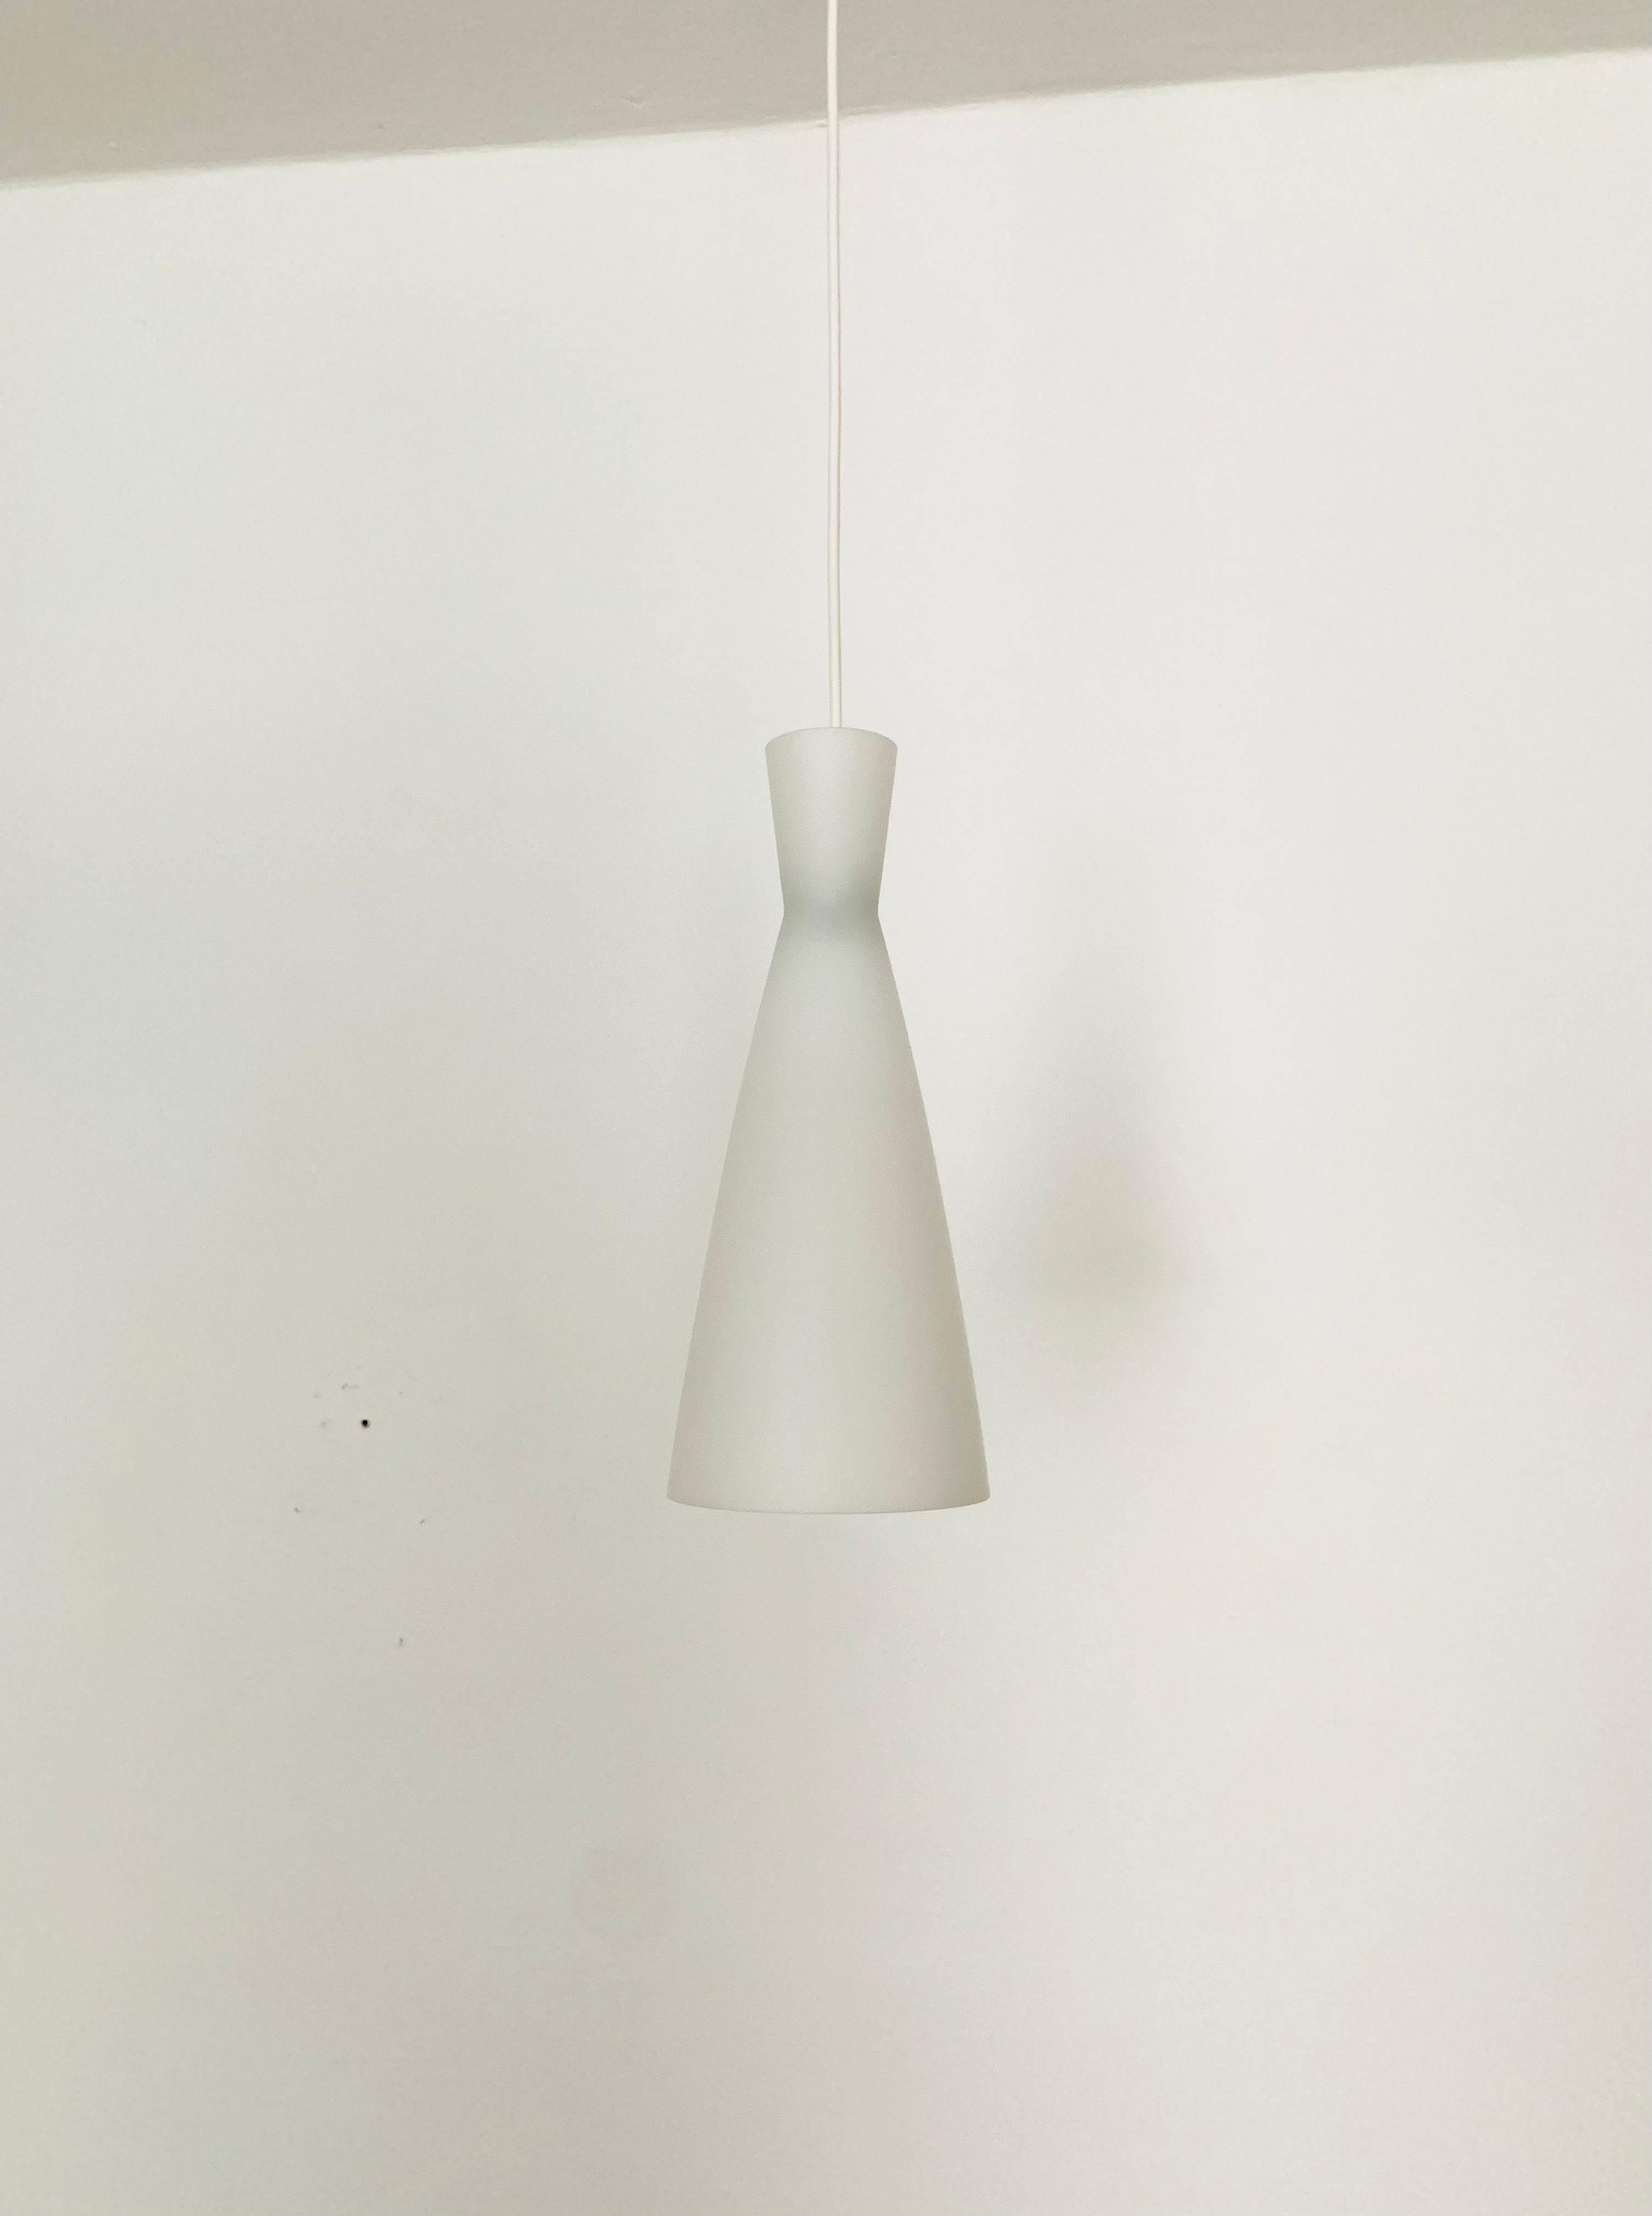 Wonderful pendant lamps from the 1950s.
Beautiful contemporary design.
Extremely beautiful lighting atmosphere with both direct and indirect light.

Manufacturer: Peill and Putzler
Design: Aloys Gangkofner

Condition:

Very good vintage condition